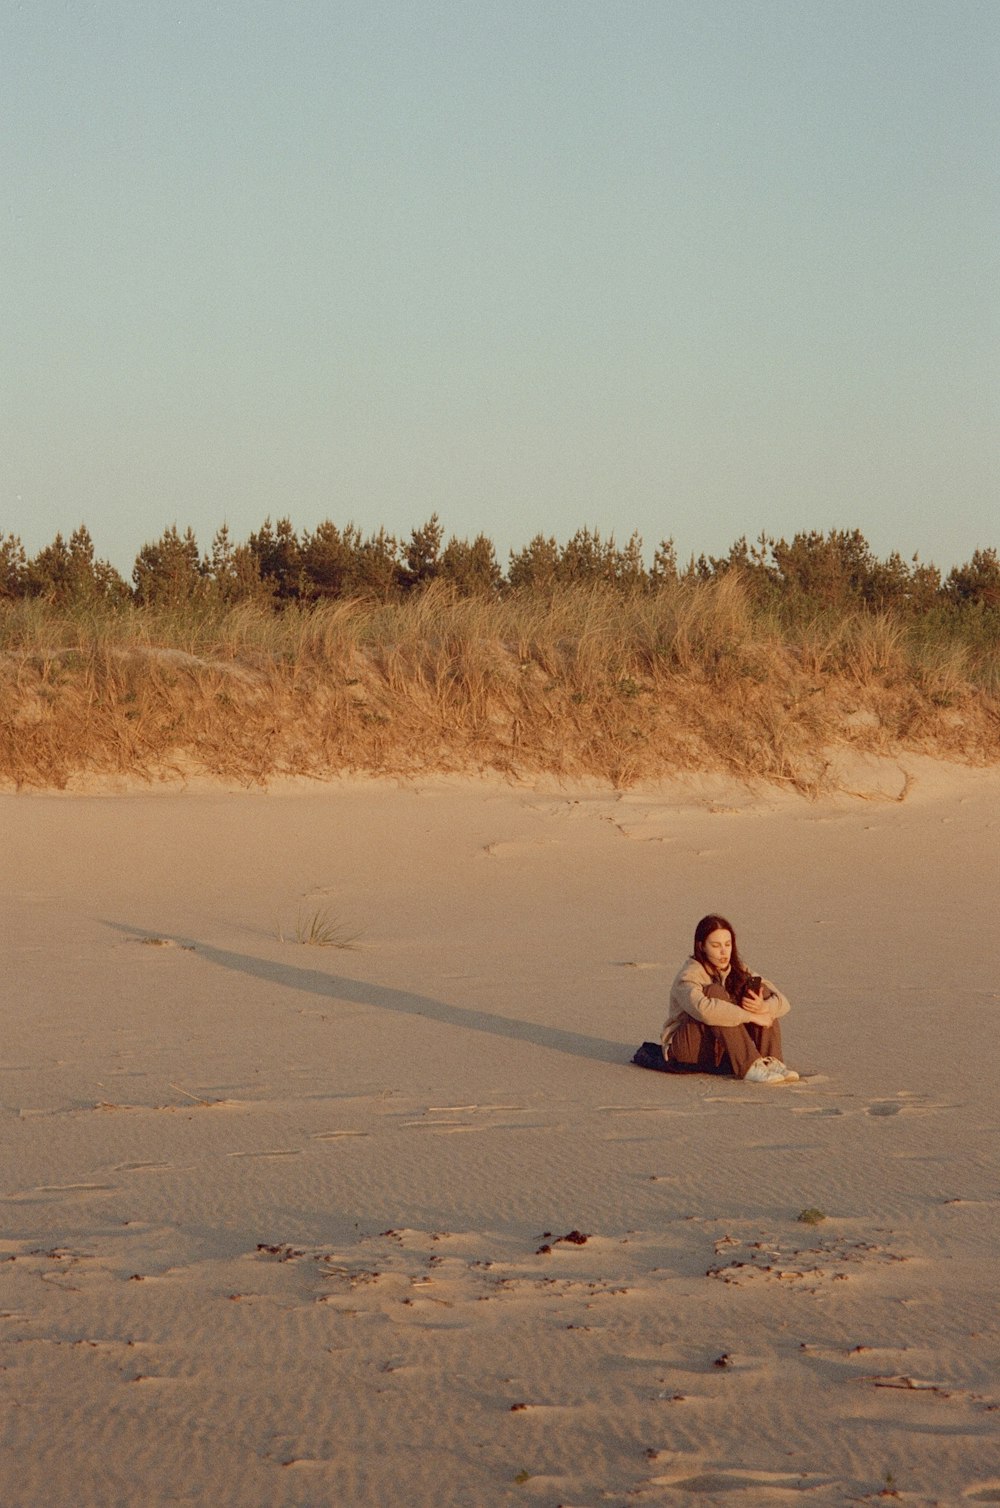 a woman sitting in the sand with a kite in the background